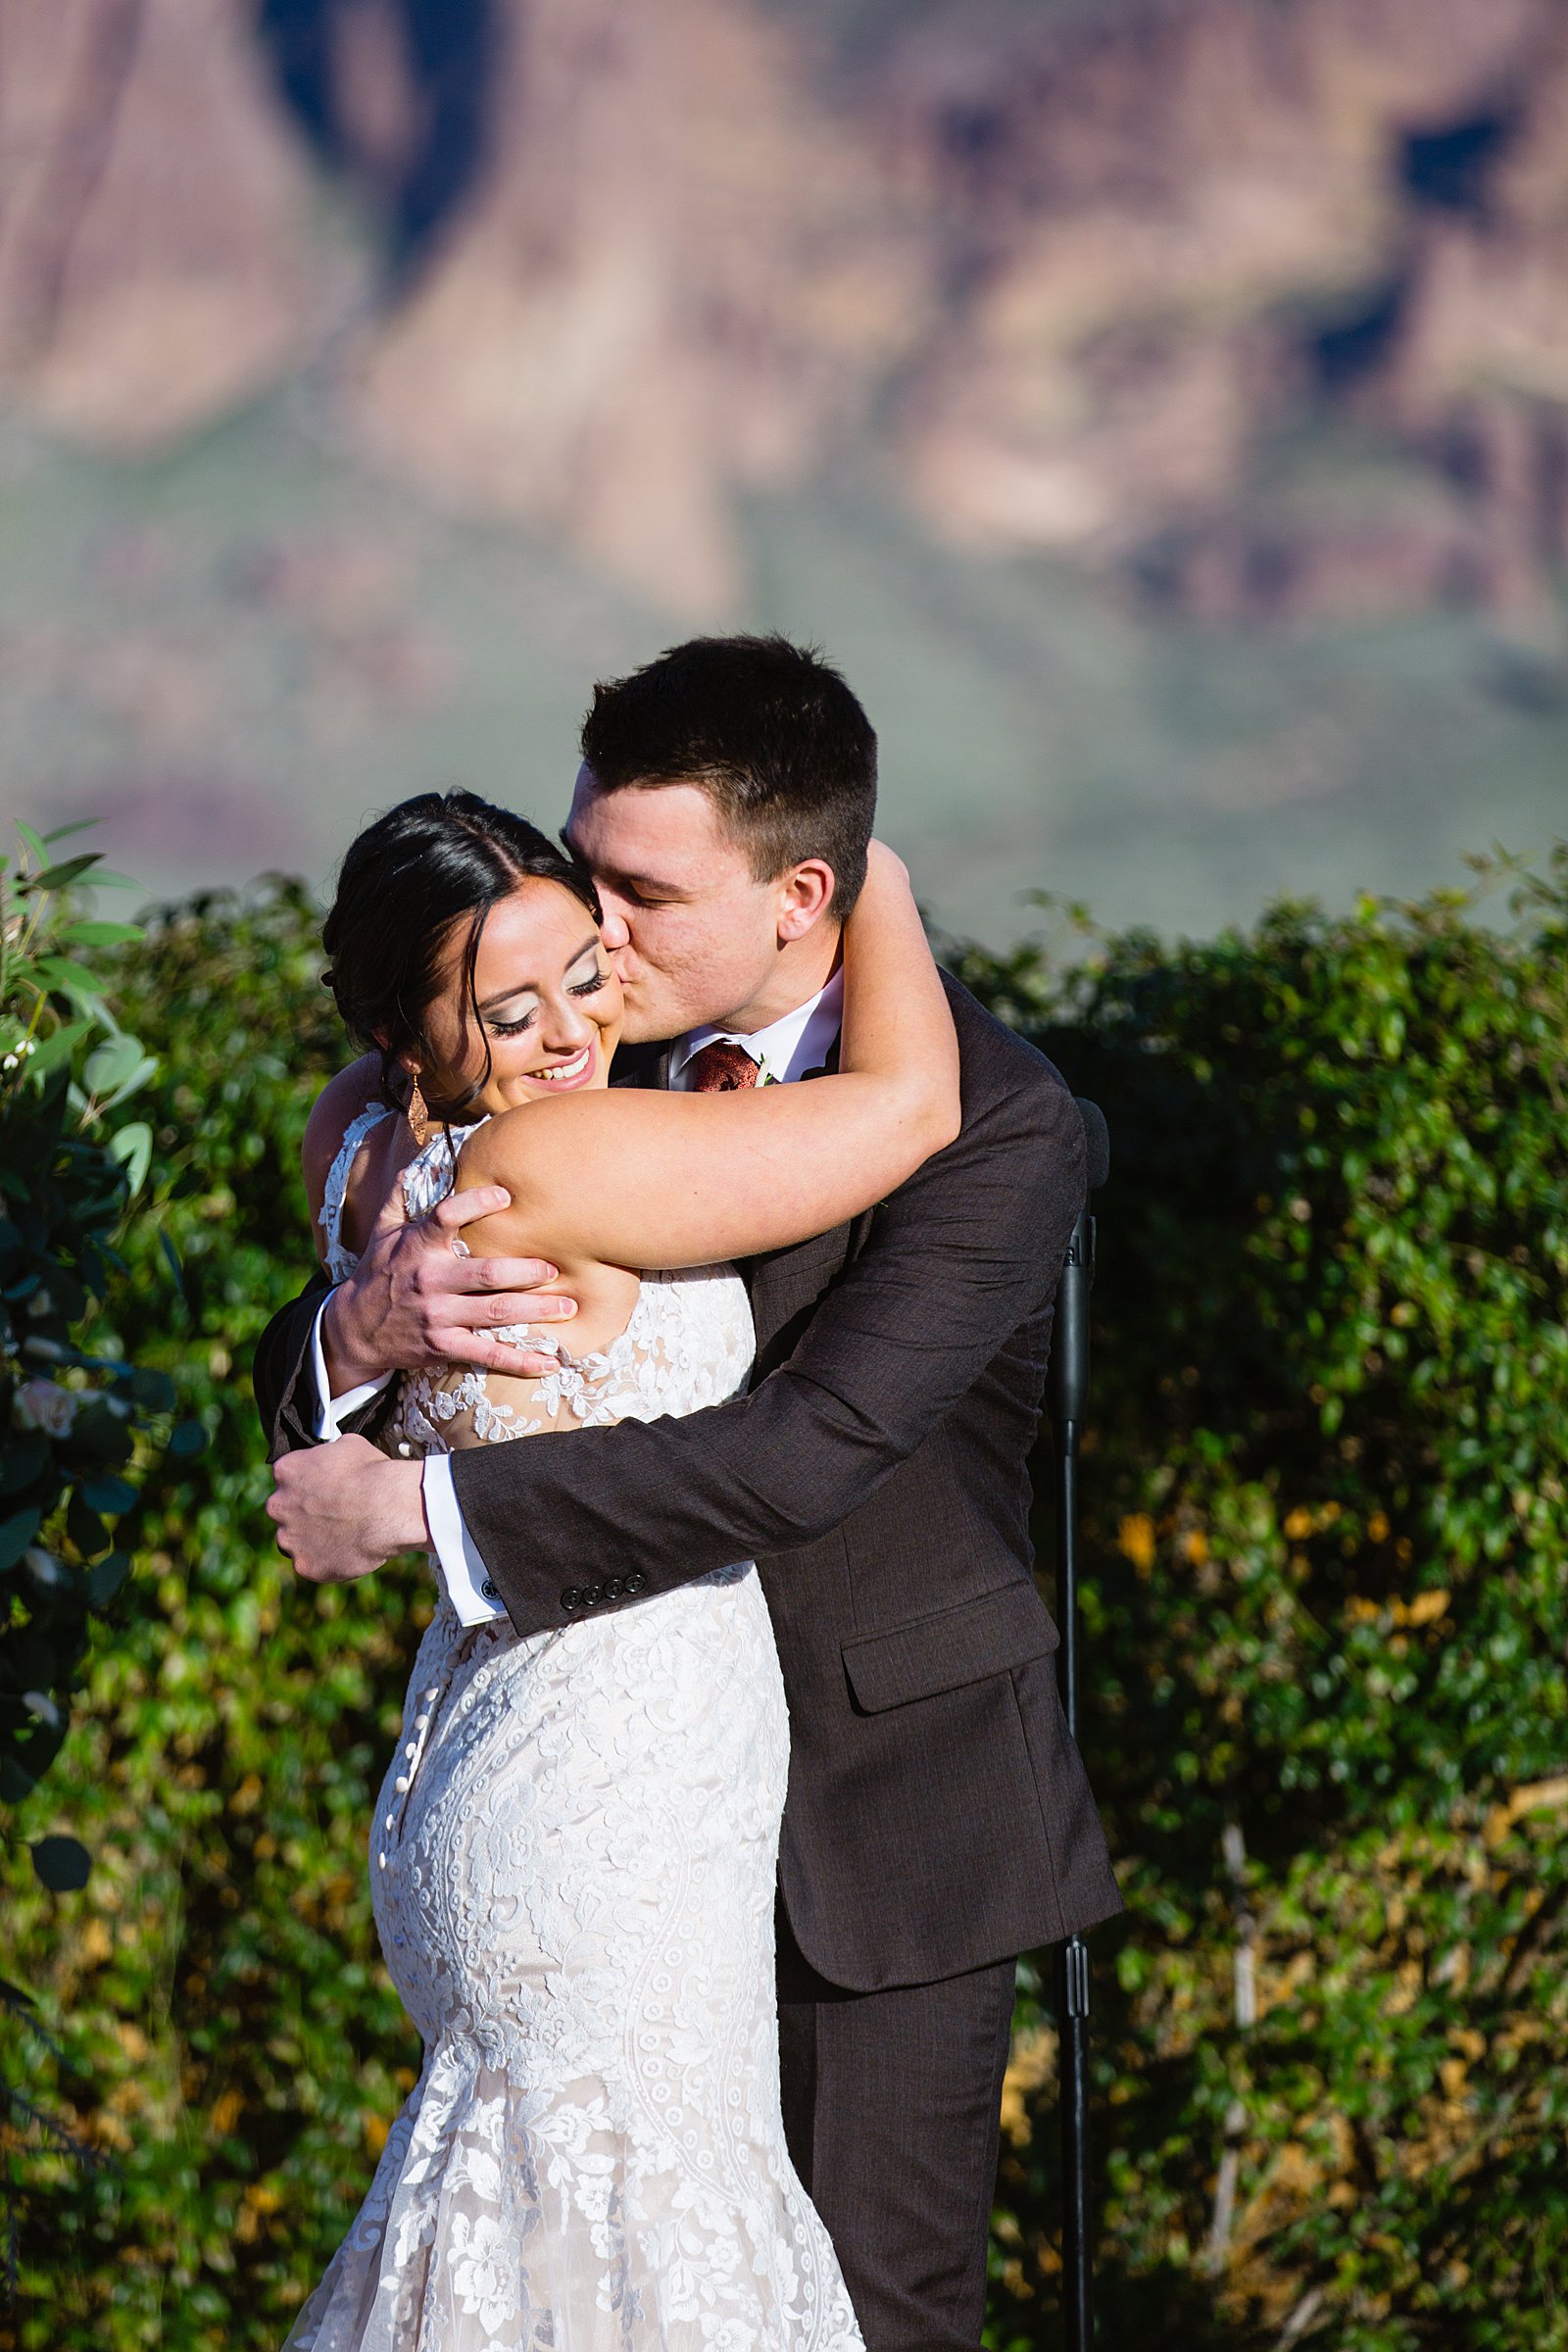 Bride and Groom share their first kiss during their wedding ceremony at The Paseo by Arizona wedding photographer PMA Photography.